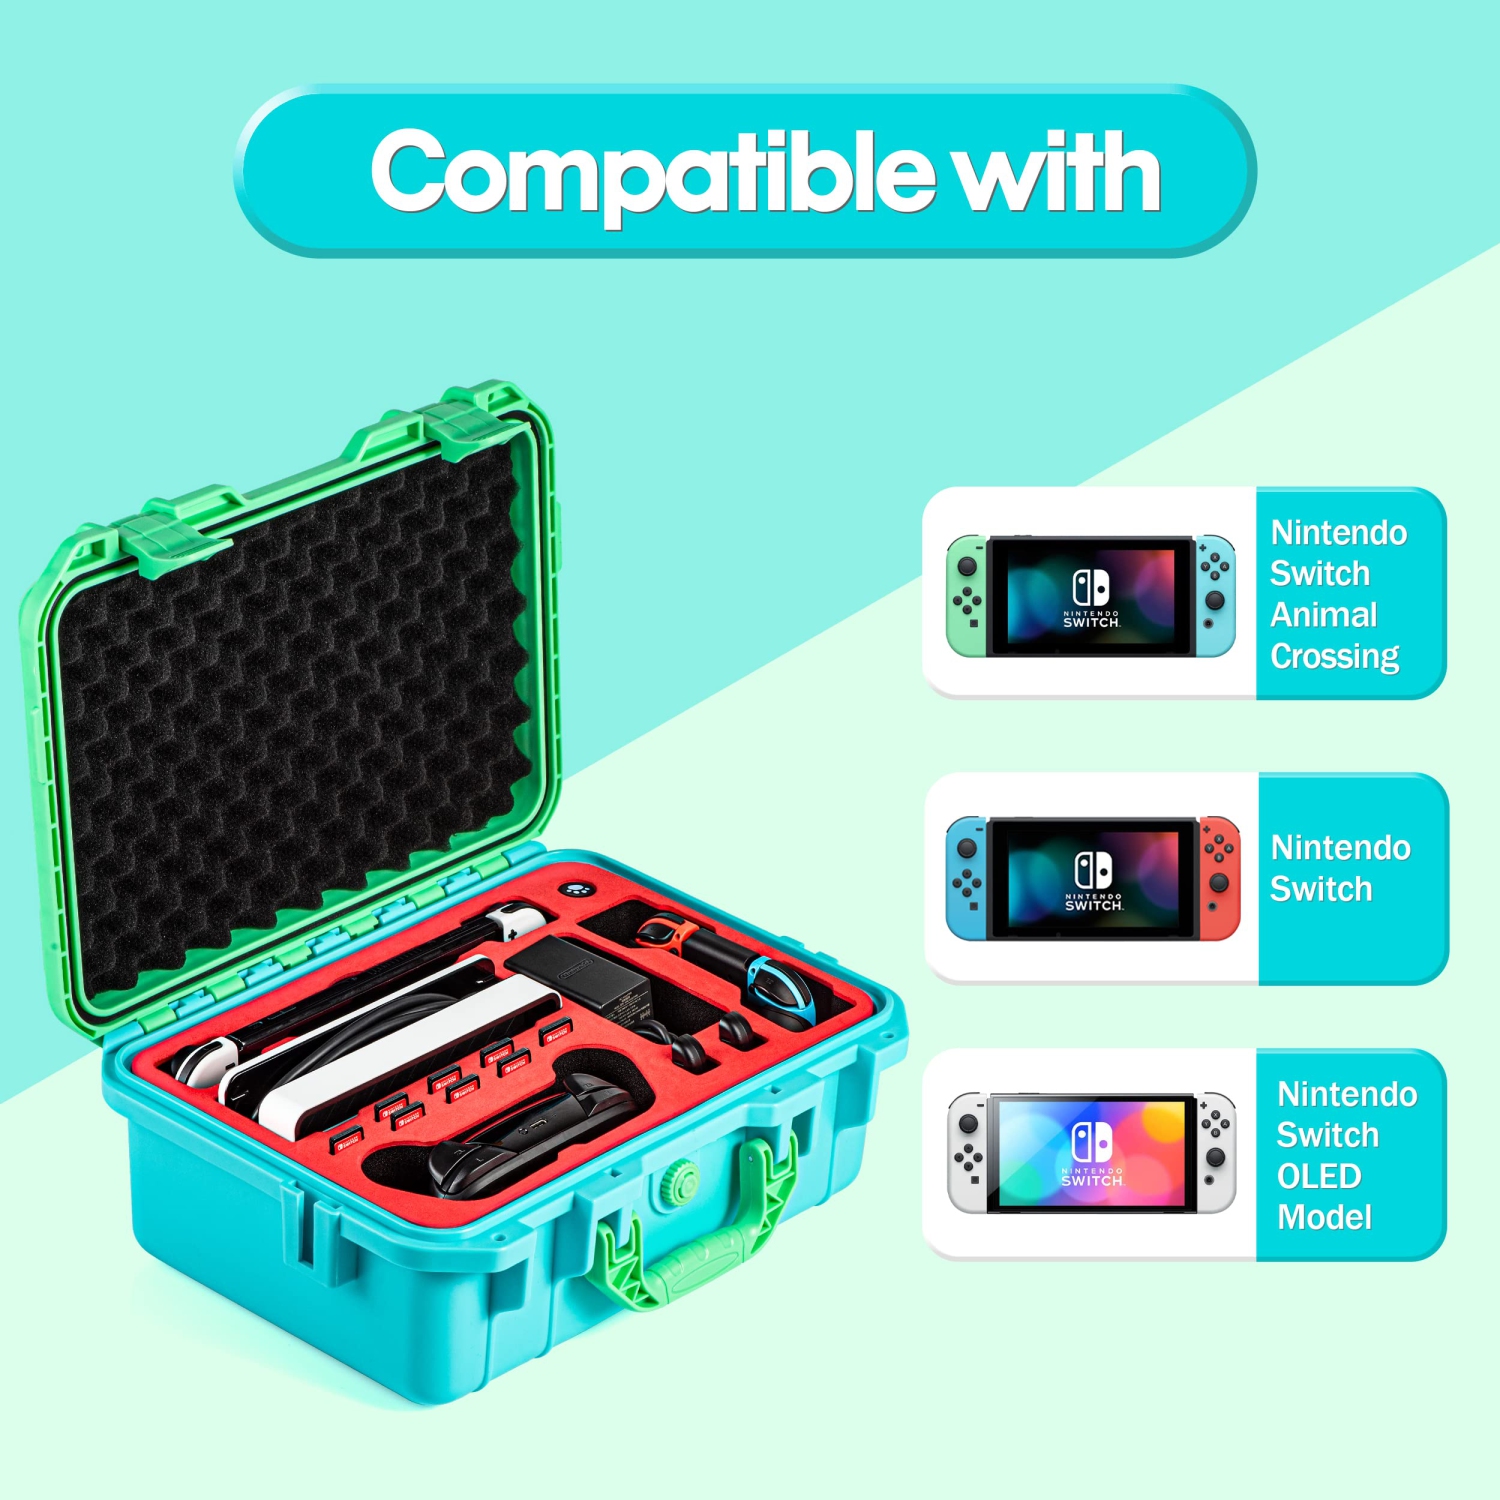 Waterproof Carrying Case for Nintendo Switch OLED Model - Professional  Deluxe Travel Case with Soft Lining for Console, Controller, and  Accessories